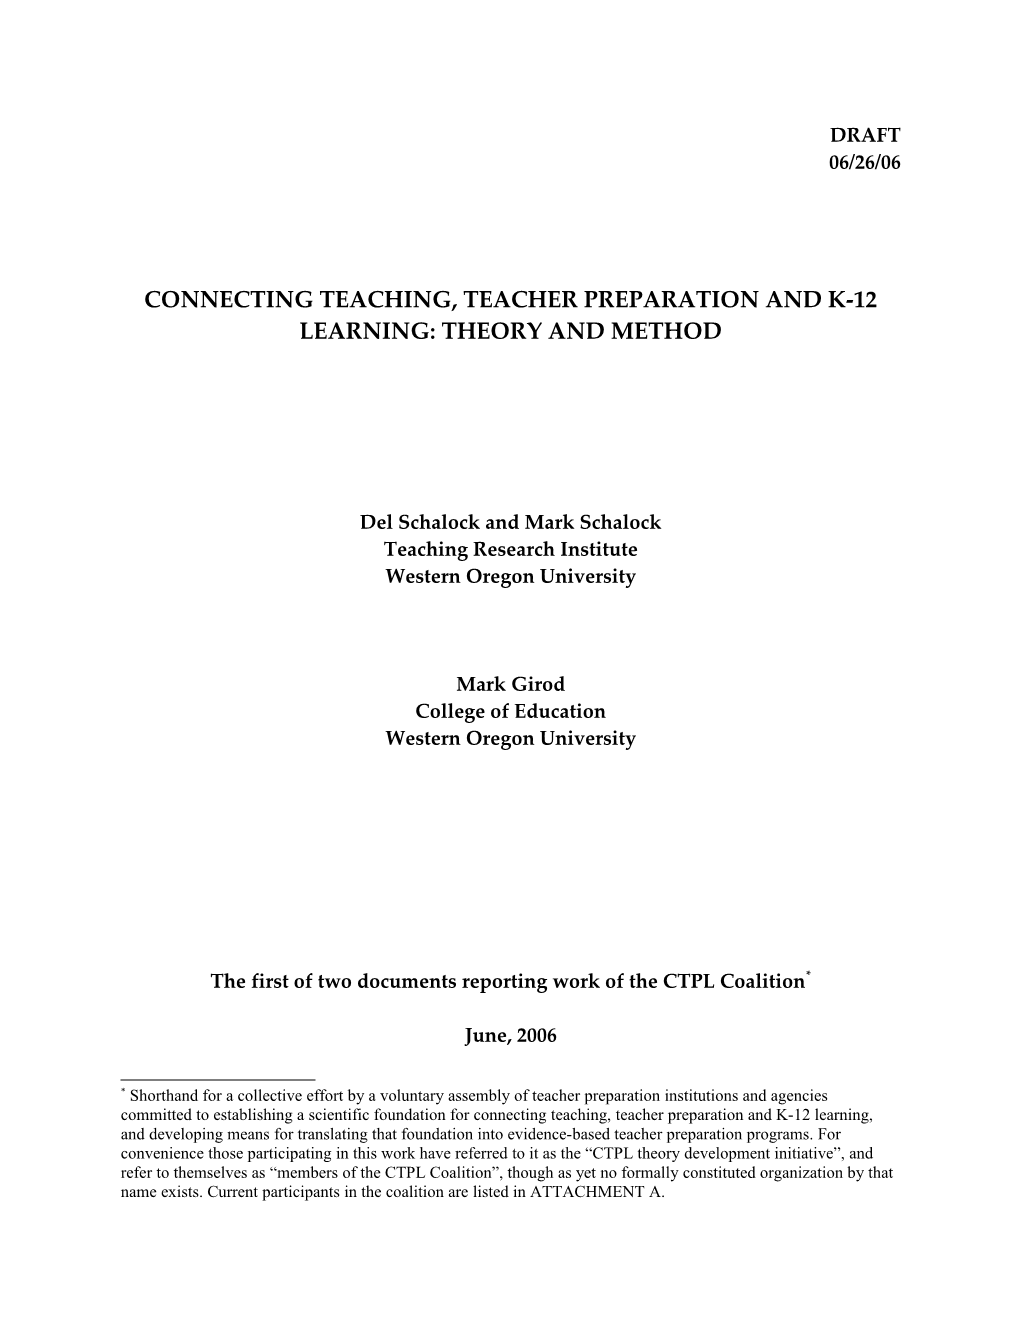 Connecting Teaching, Teacher Preparation and K-12 Learning: Theory and Method